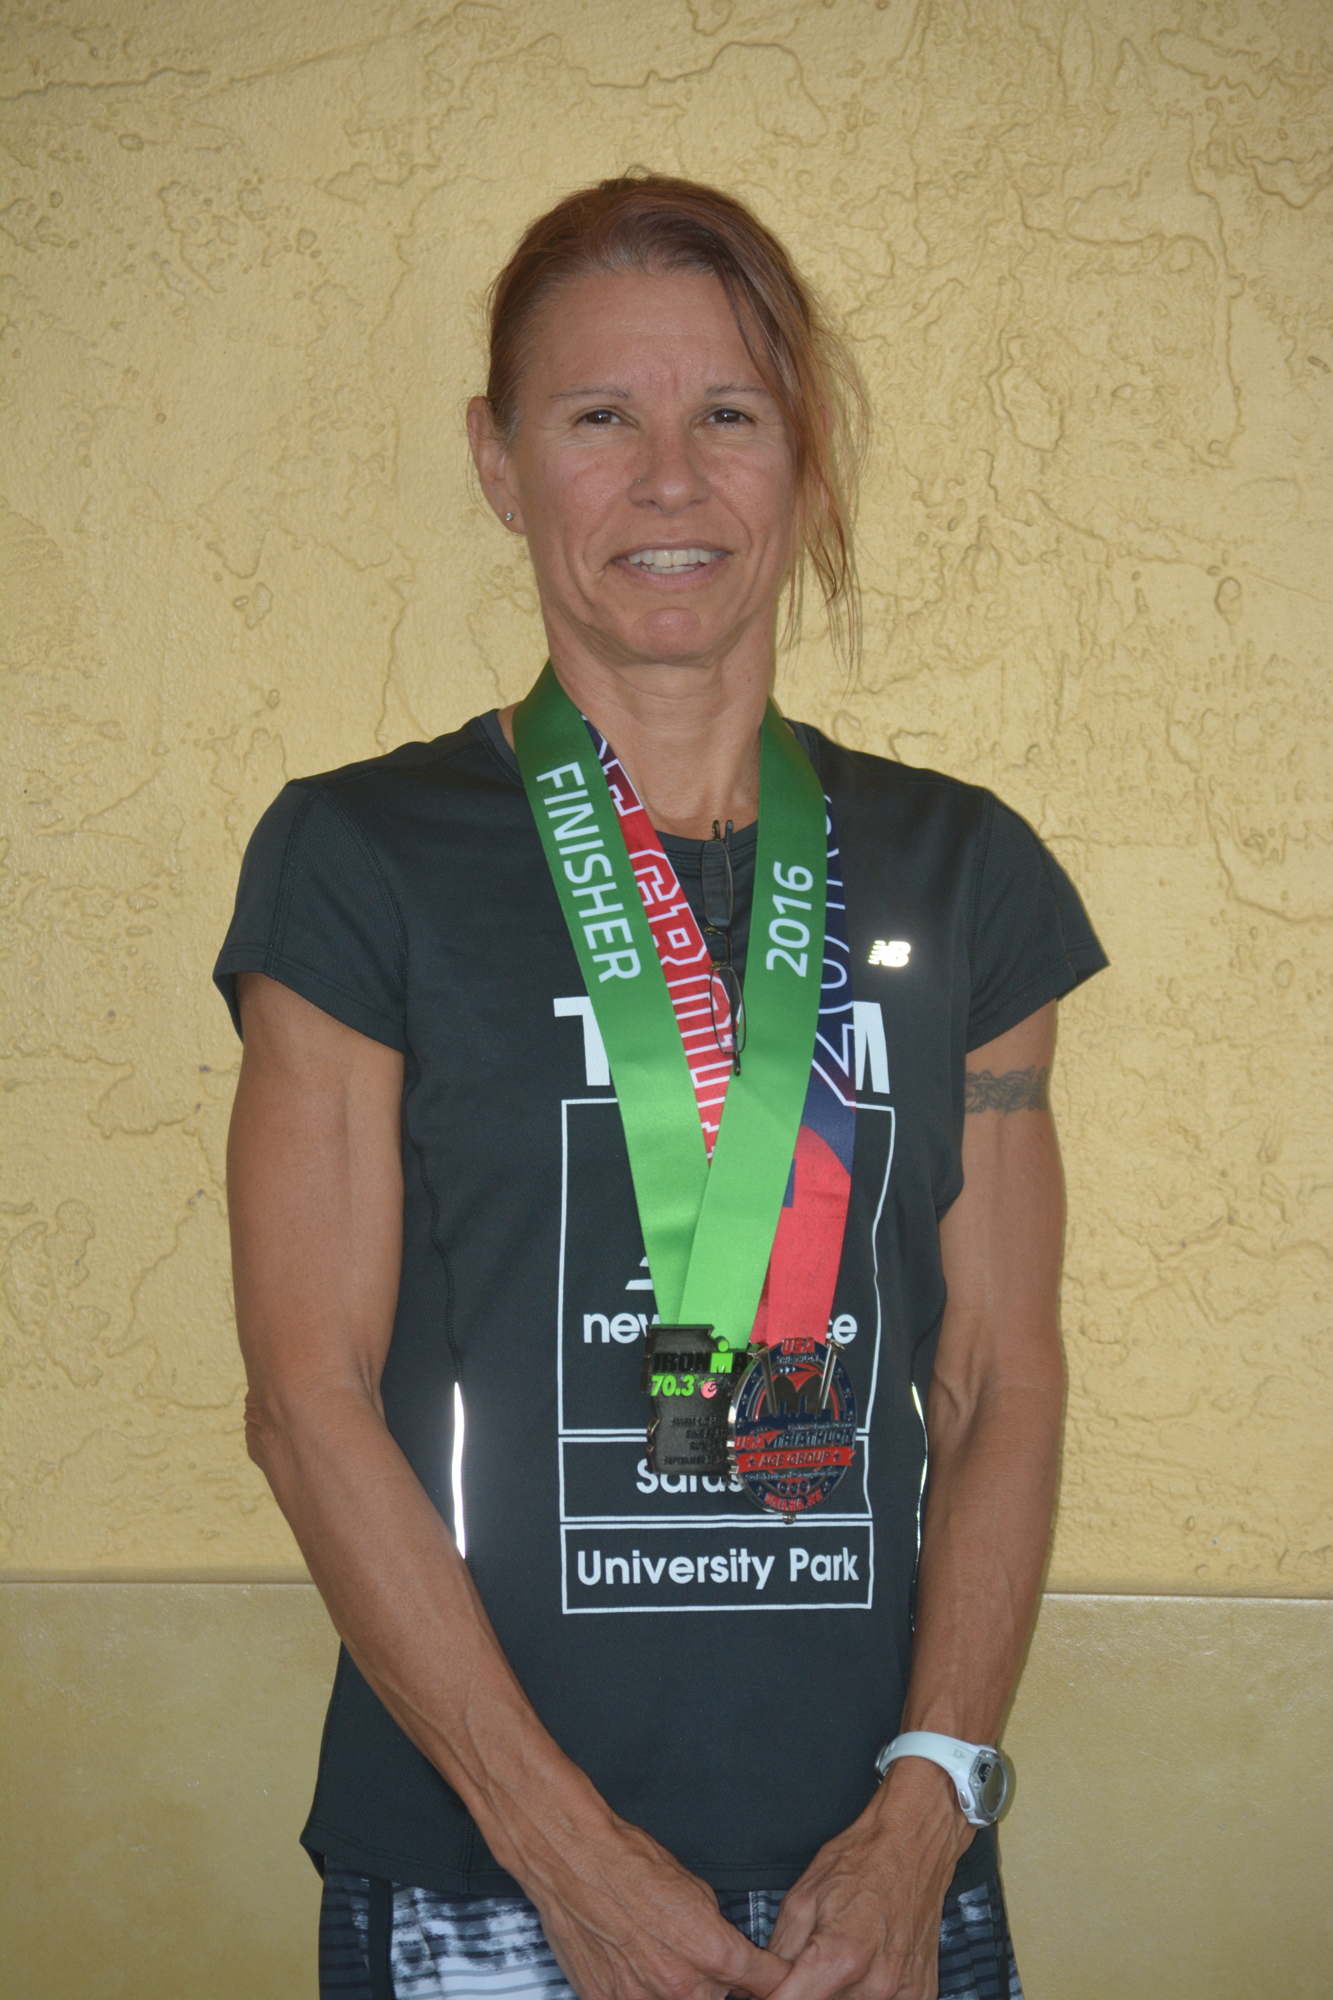 Sarasota triathlete Linda Bayne shows off medals from the IRONMAN 70.3 qualifying race in Augusta, Ga., and from the 2016 Age Group Nationals in Omaha, Neb.